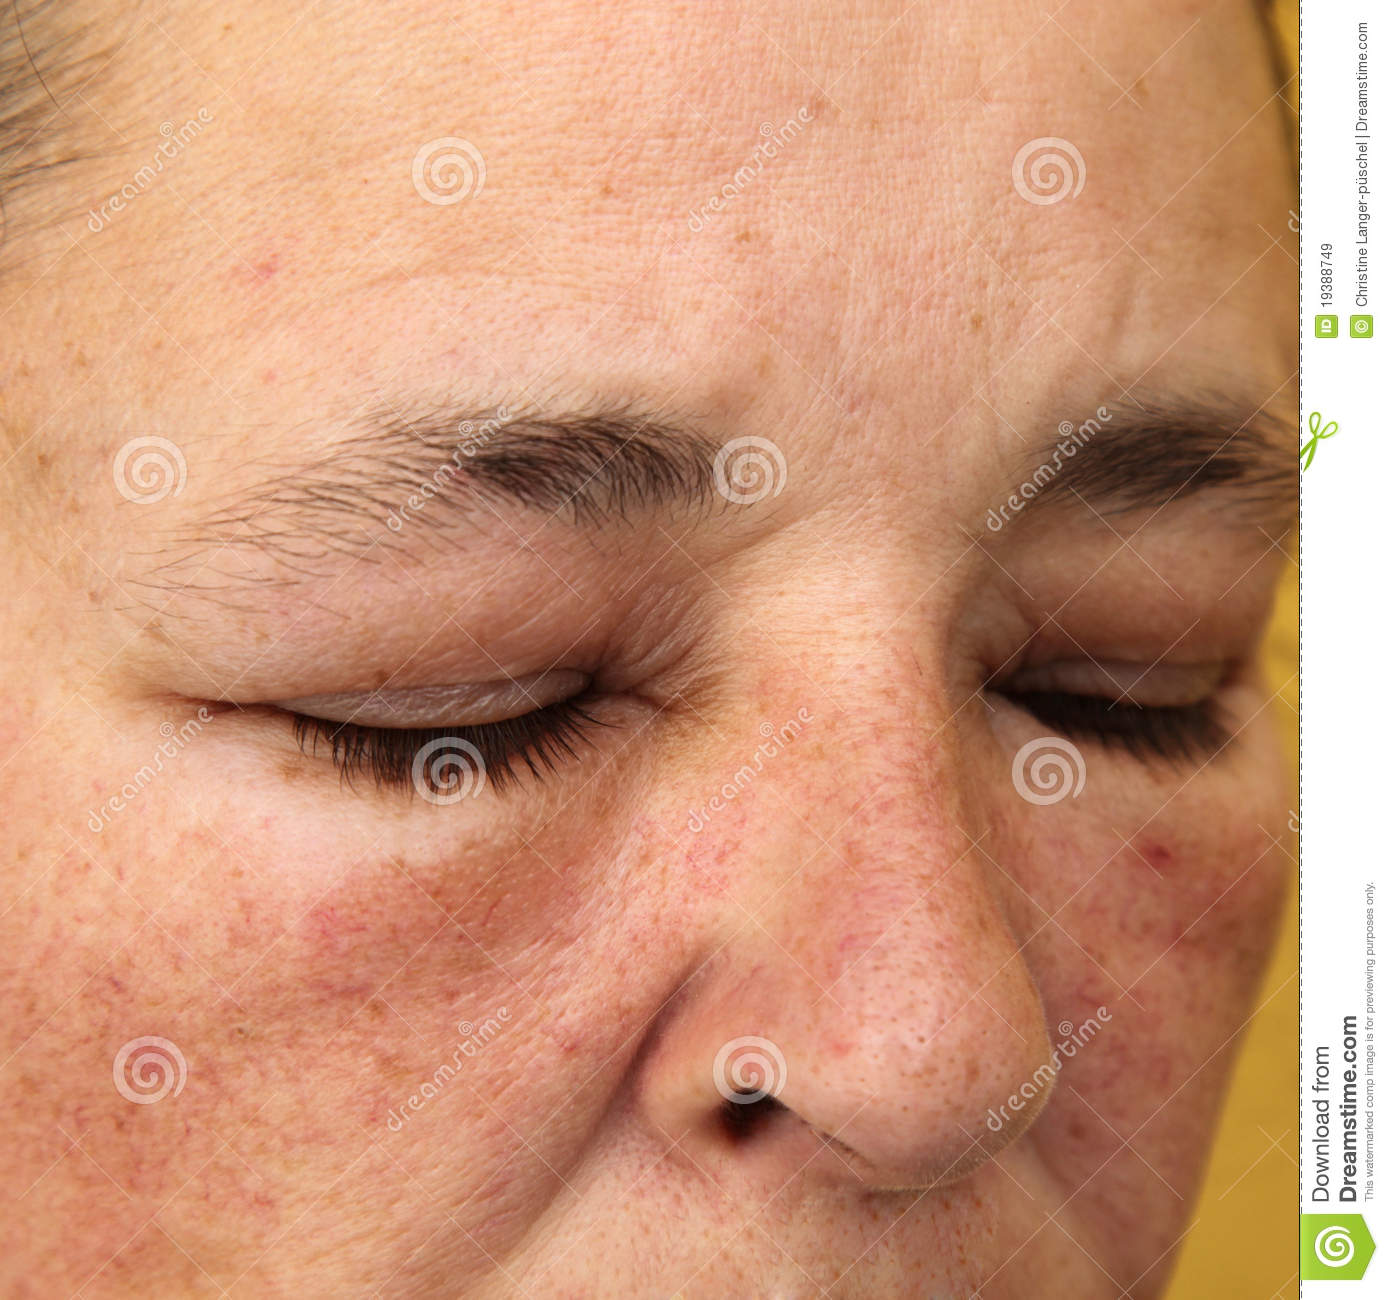 Swollen Eyes And Face For Allergy   Close Up   Square